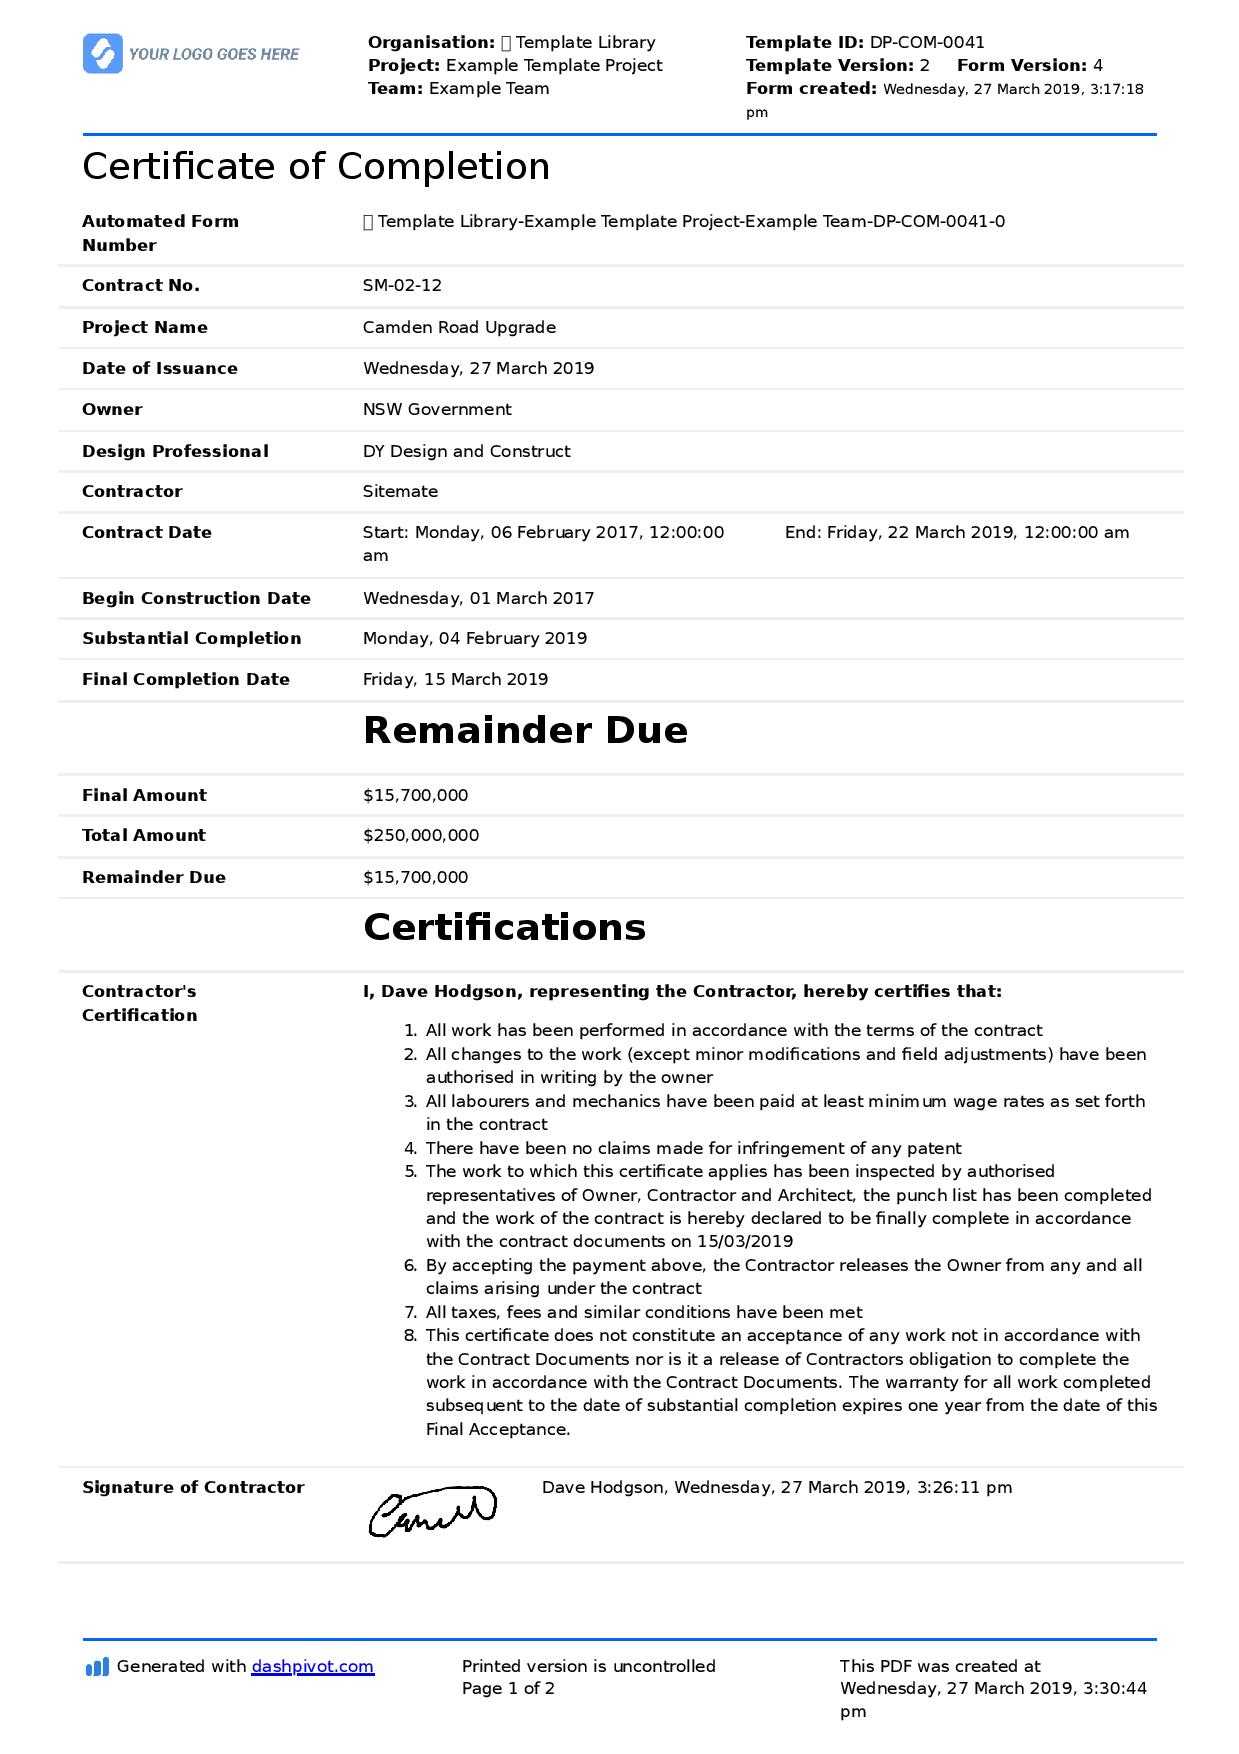 Certificate Of Completion For Construction (Free Template + Pertaining To Construction Payment Certificate Template